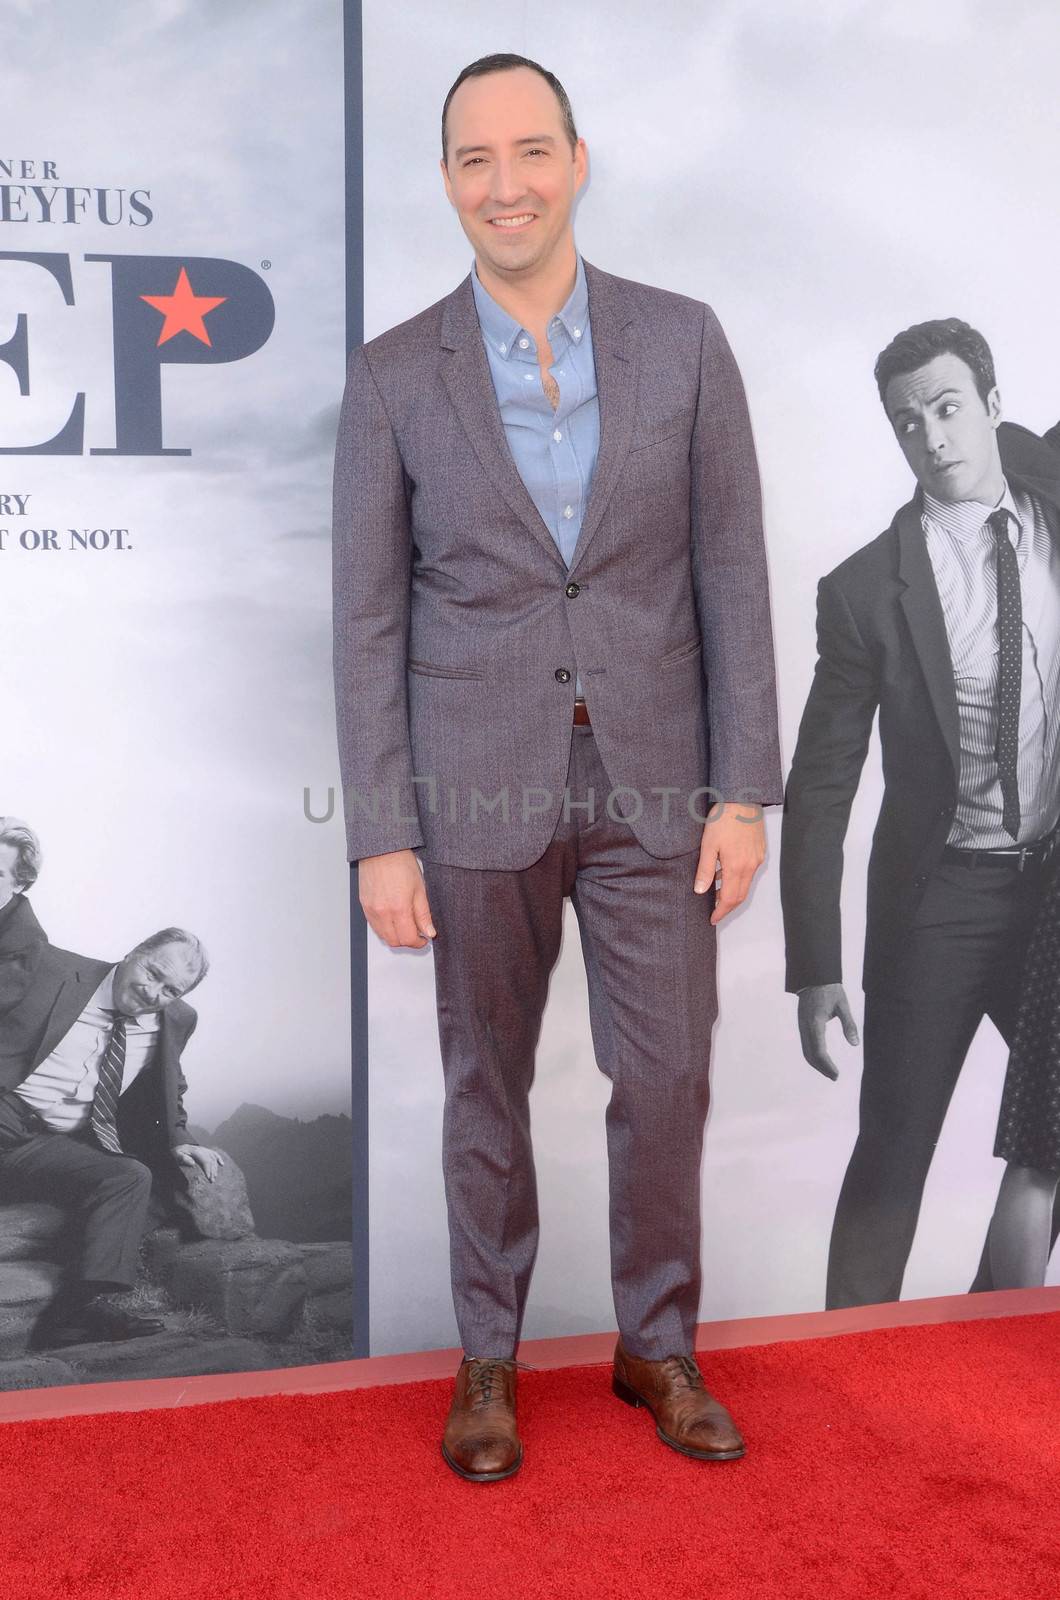 Tony Hale
at FYC for HBO's series VEEP 6th Season, Television Academy, North Hollywood, CA 05-25-17/ImageCollect by ImageCollect